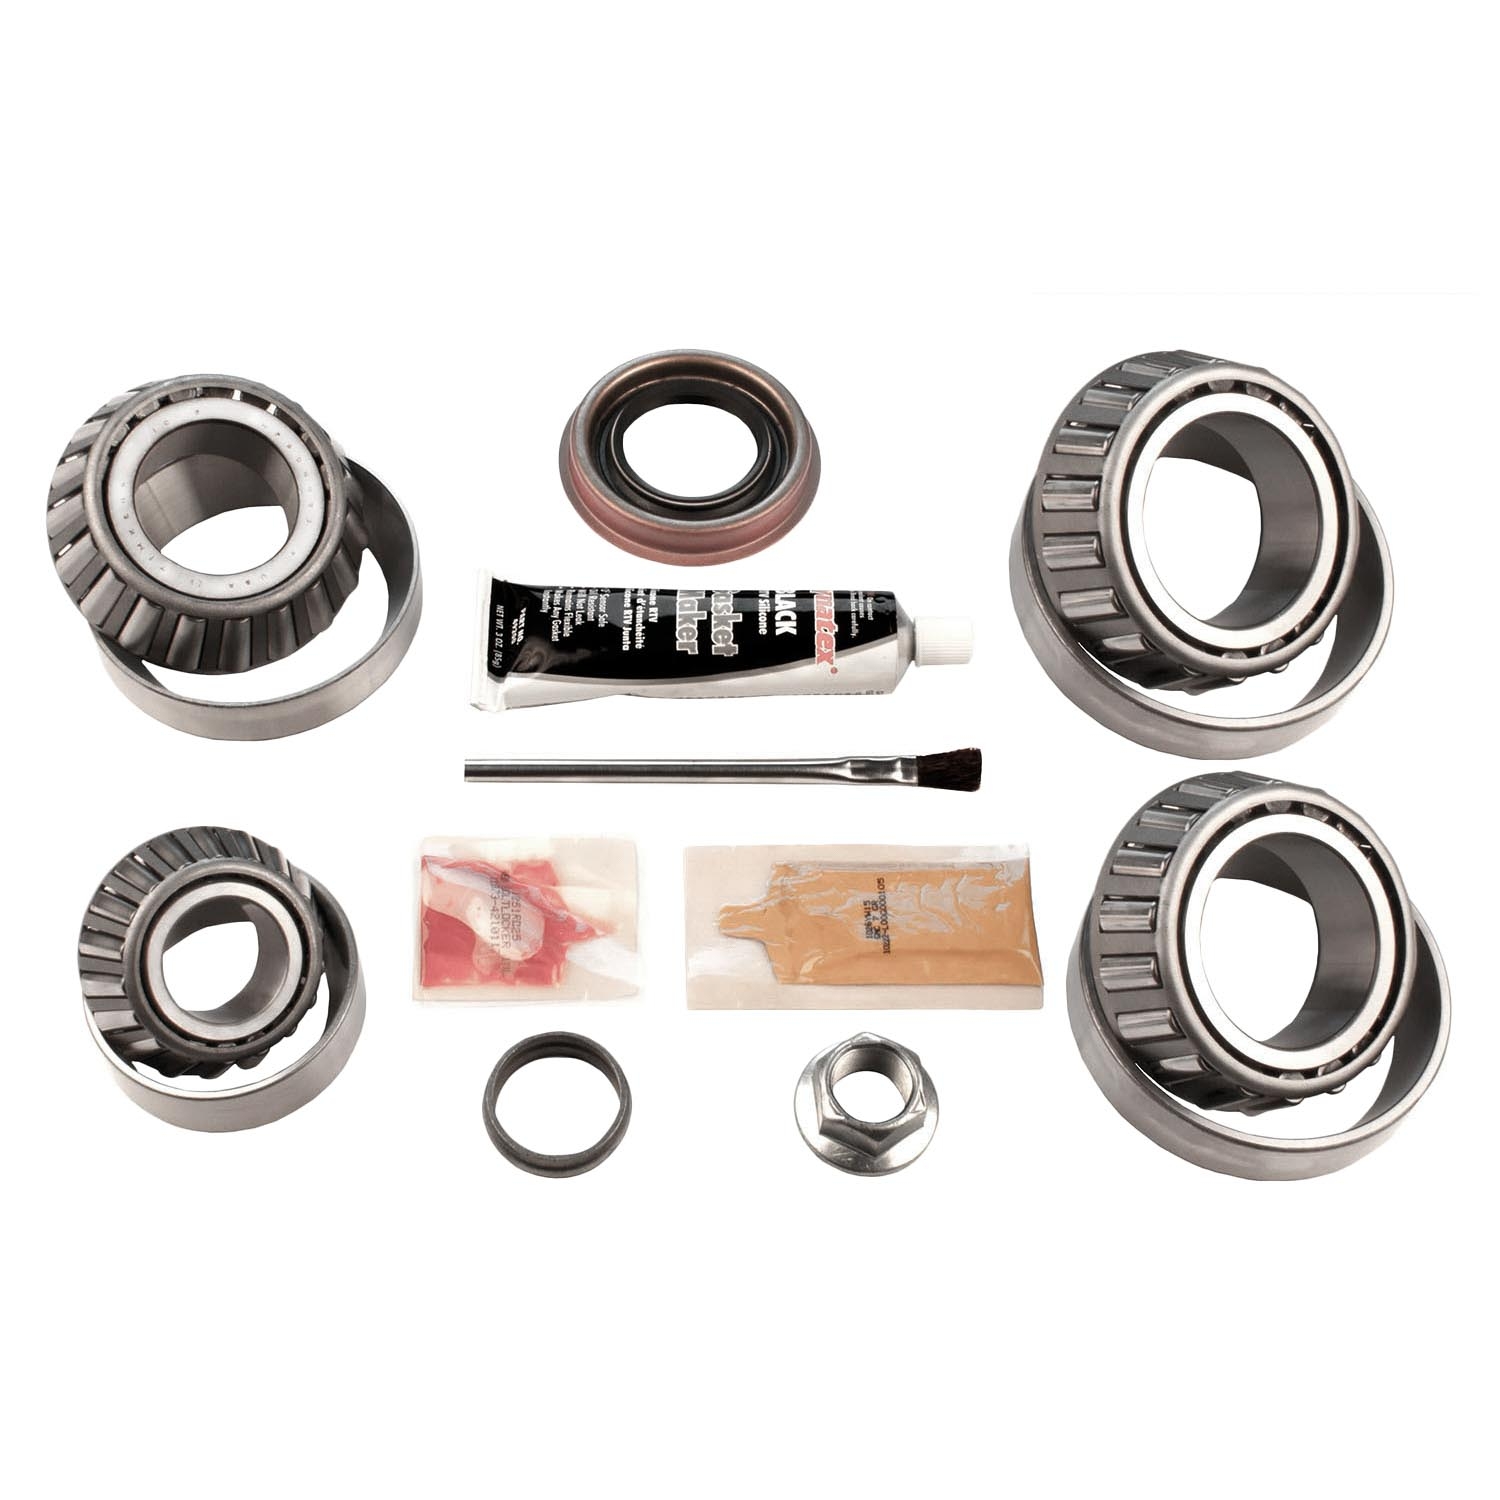 Motive Gear Differential Bearing Kits Ford 10.5 | Bk Ford 10.5 ’99-’07 | Differential Rebuild